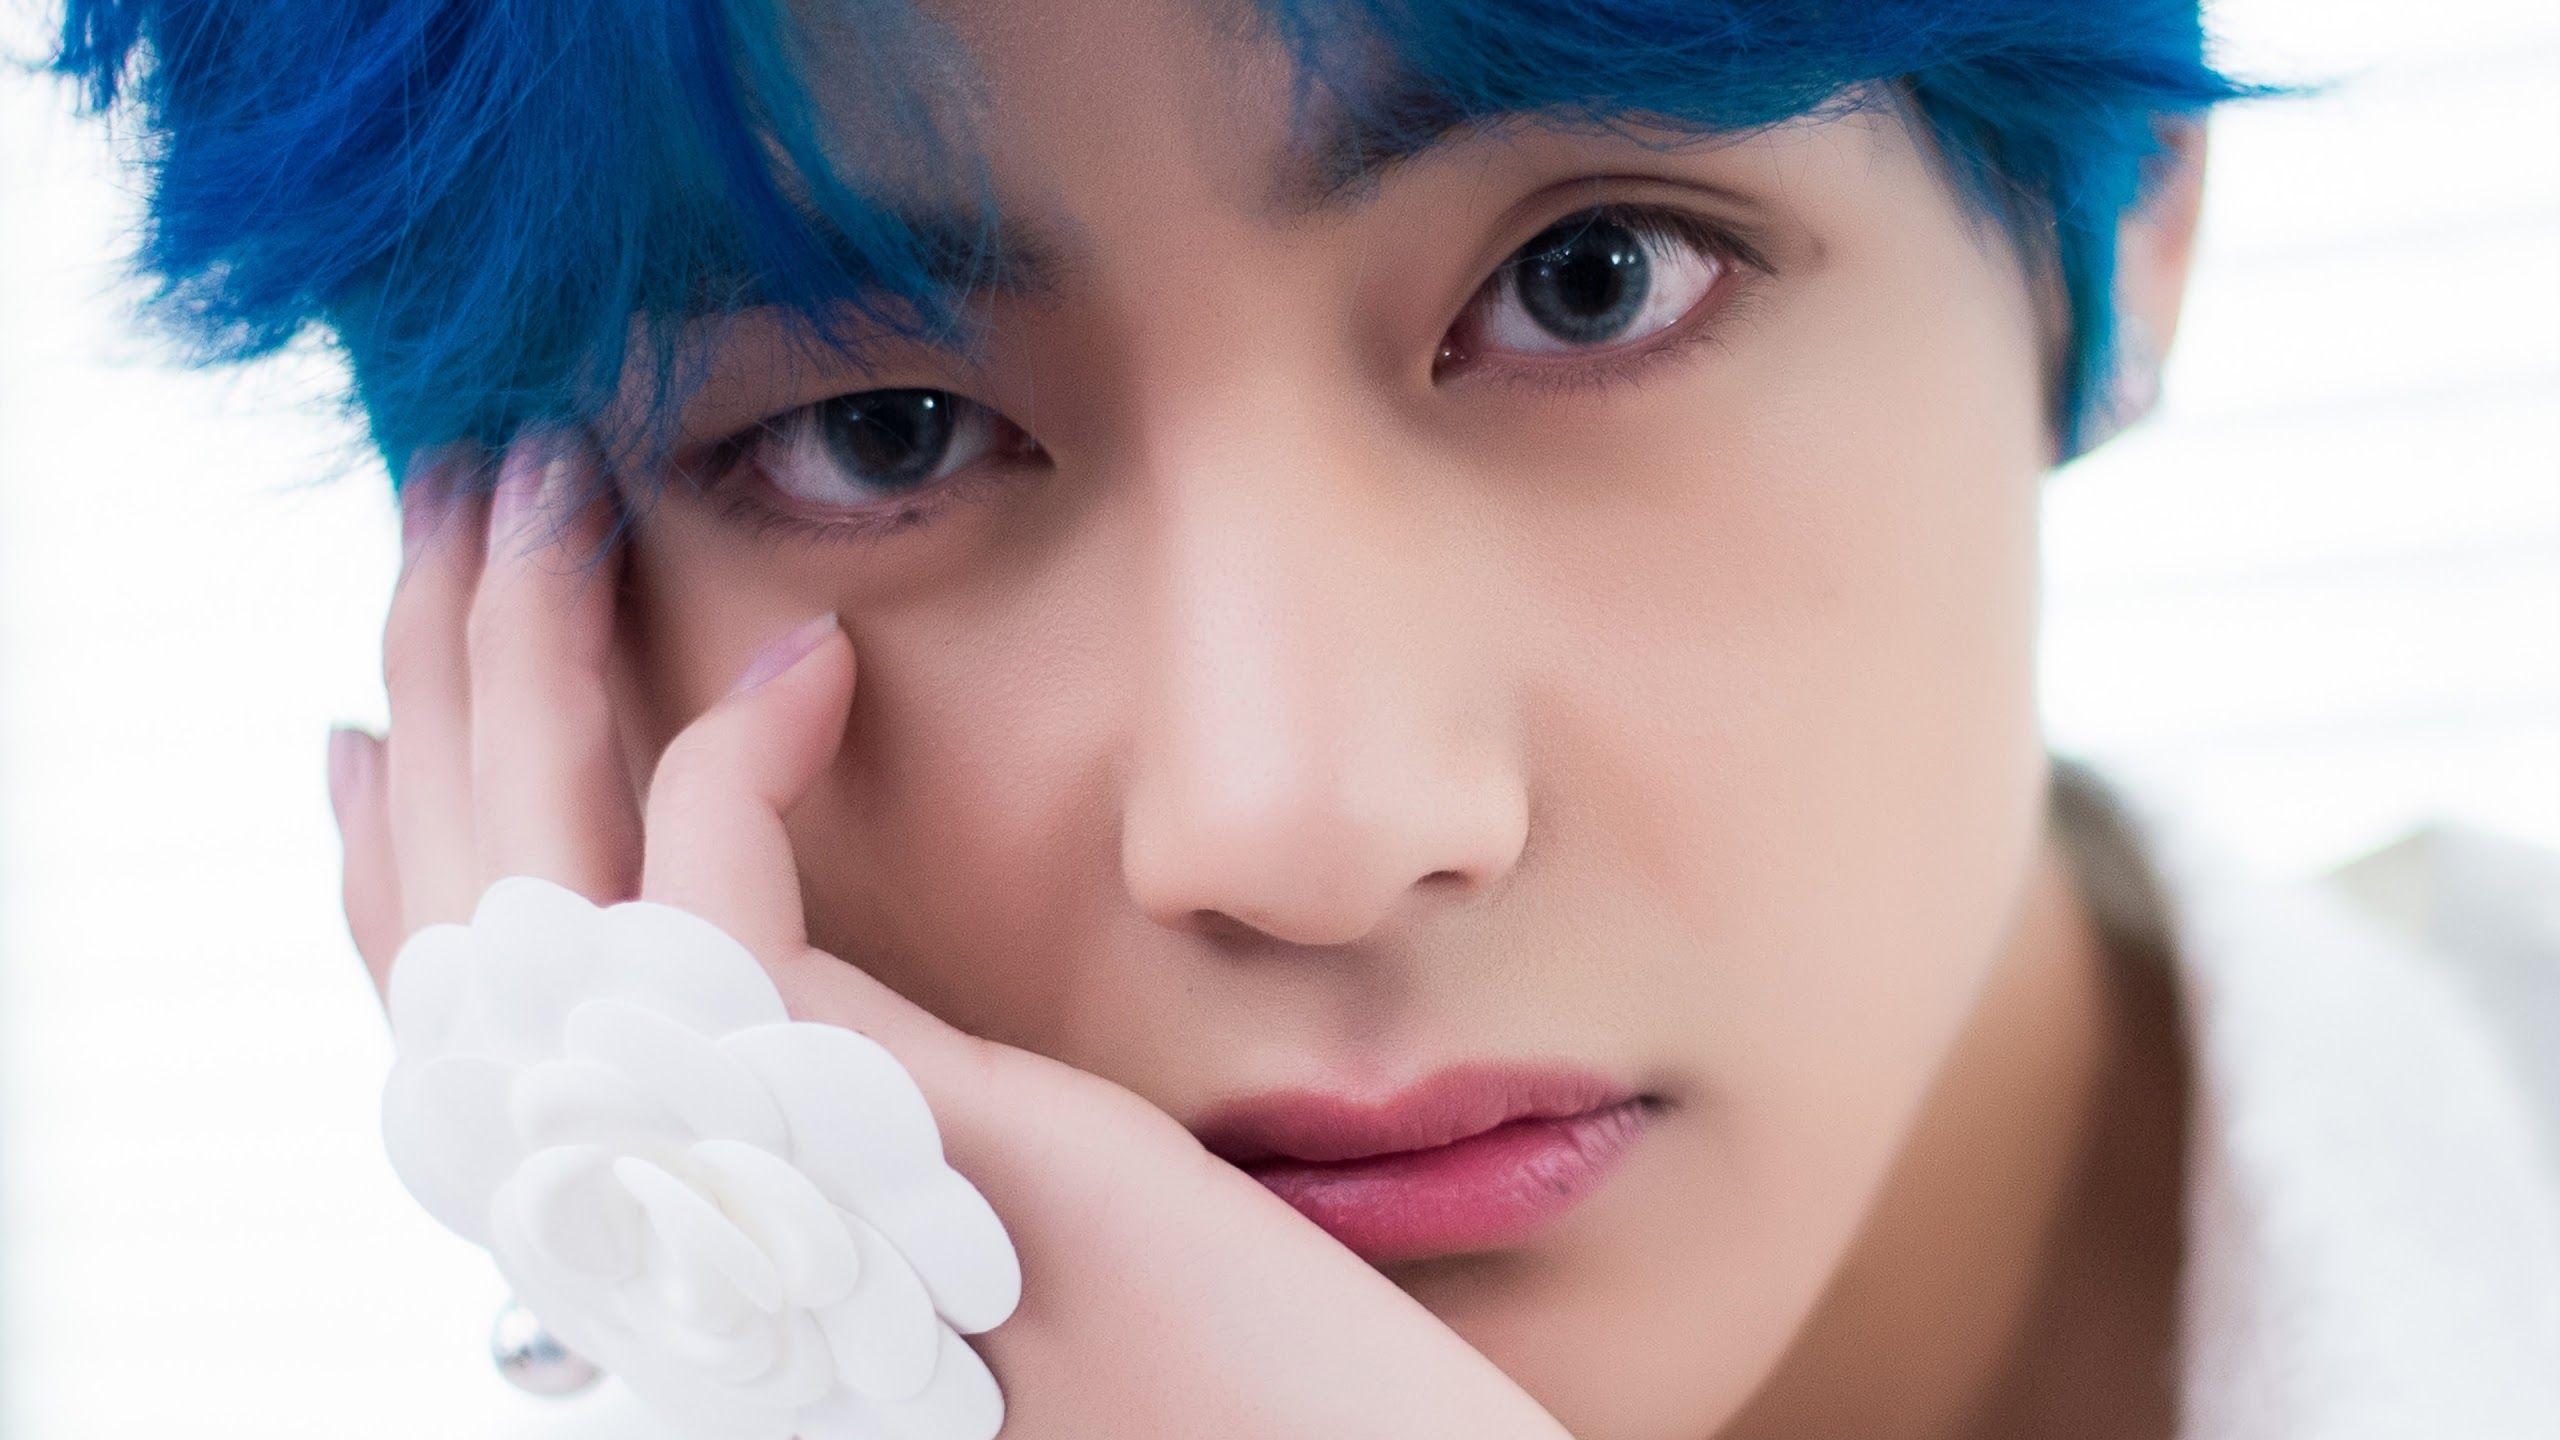 4. Taehyung's blue hair and its impact on fans' reactions to "Persona" - wide 6